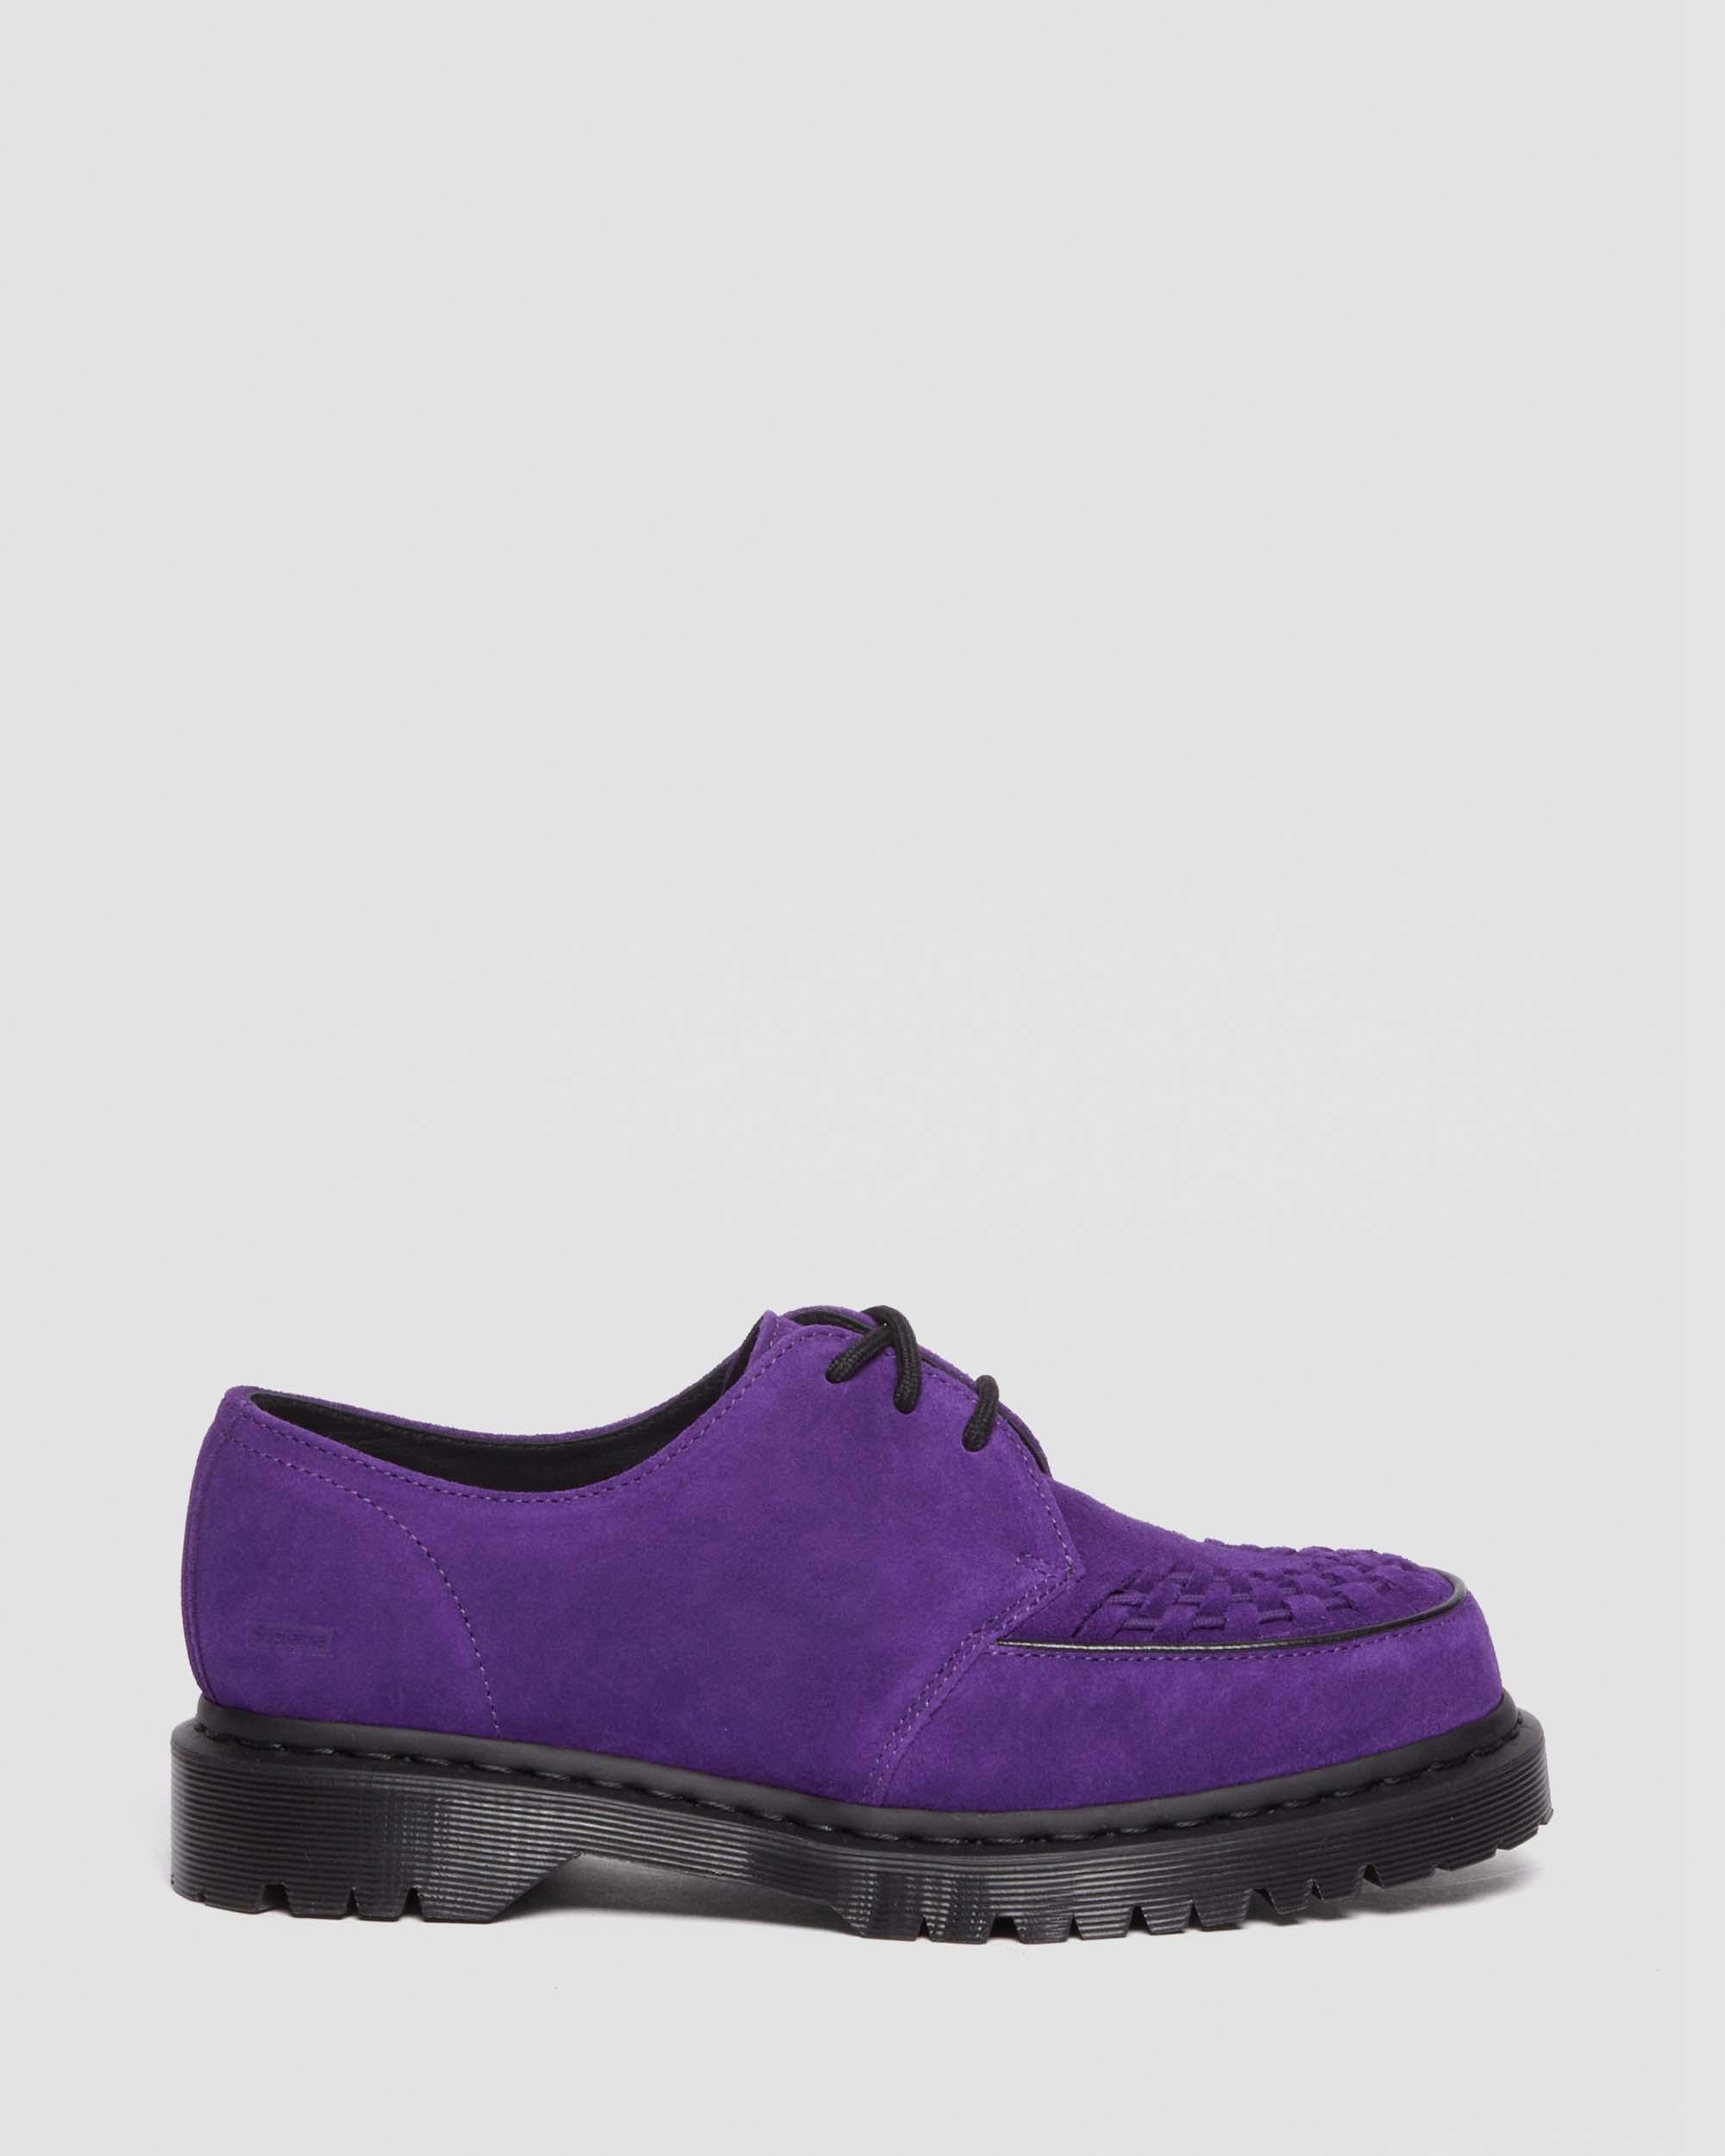 DR MARTENS Ramsey Supreme Suede Creepers